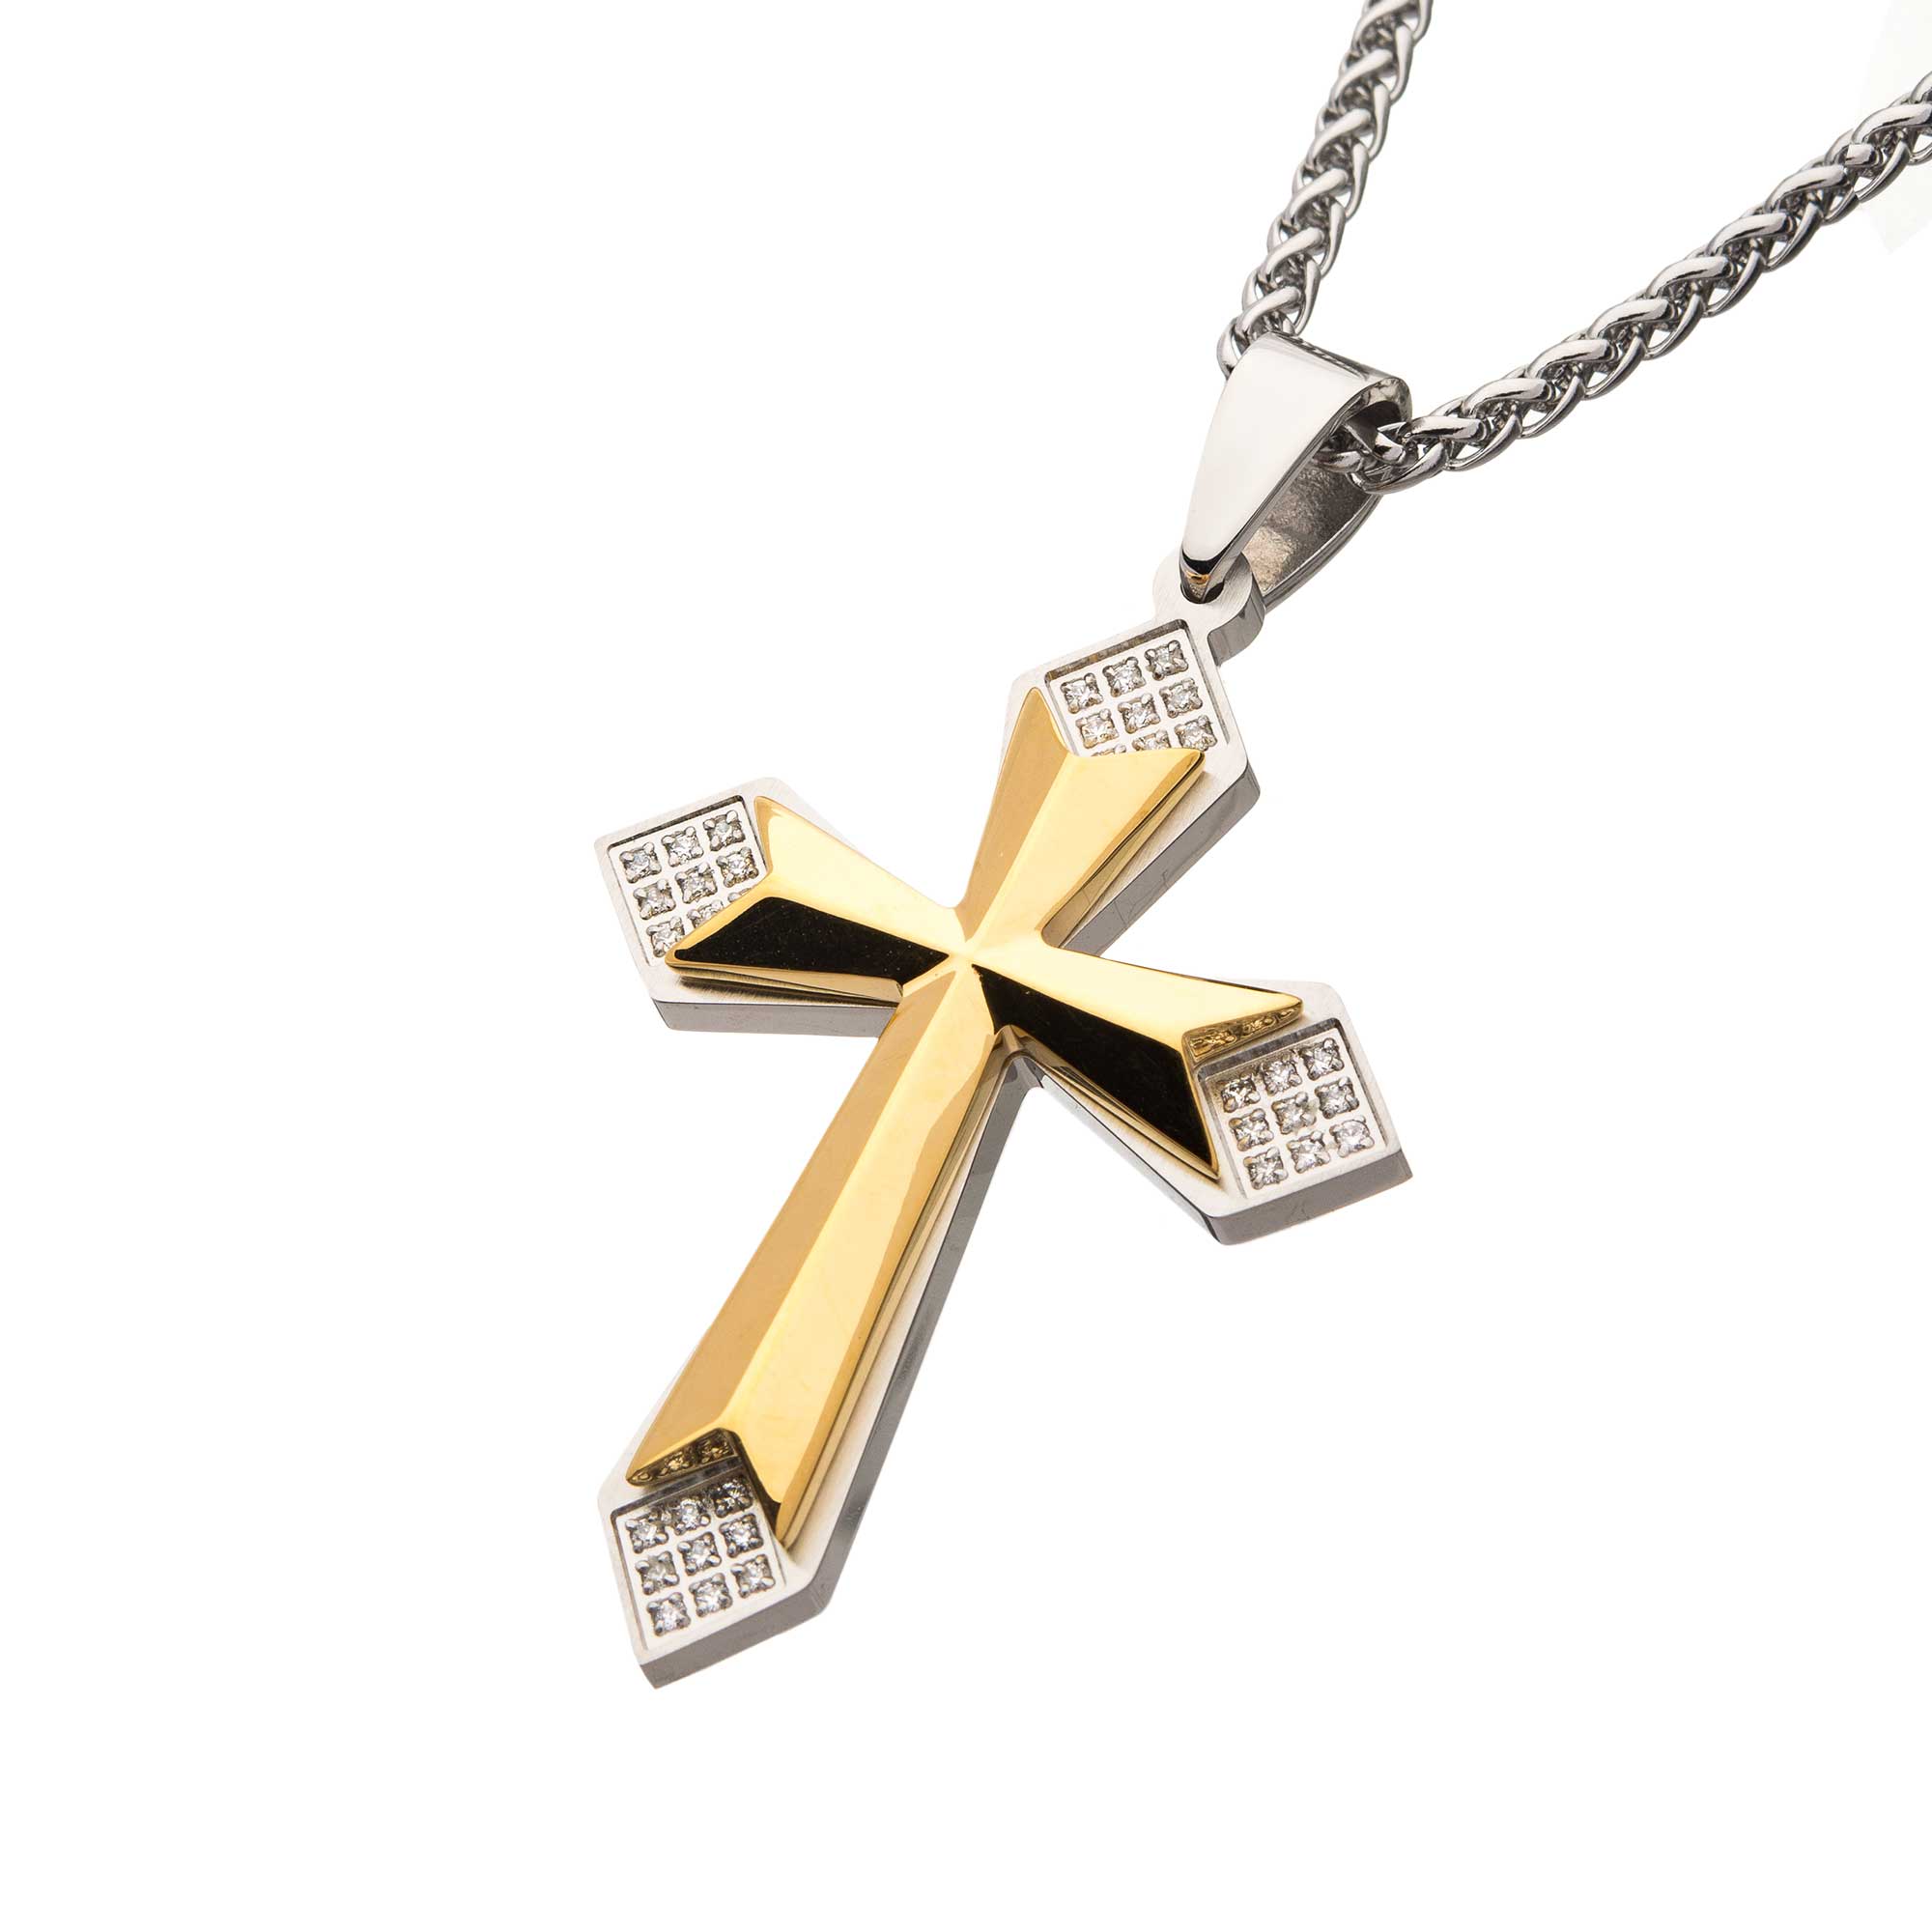 Gold Plated Cross with 36pcs CNC Prong Set Clear CZ Pendant with Steel Wheat Chain Image 2 Ken Walker Jewelers Gig Harbor, WA